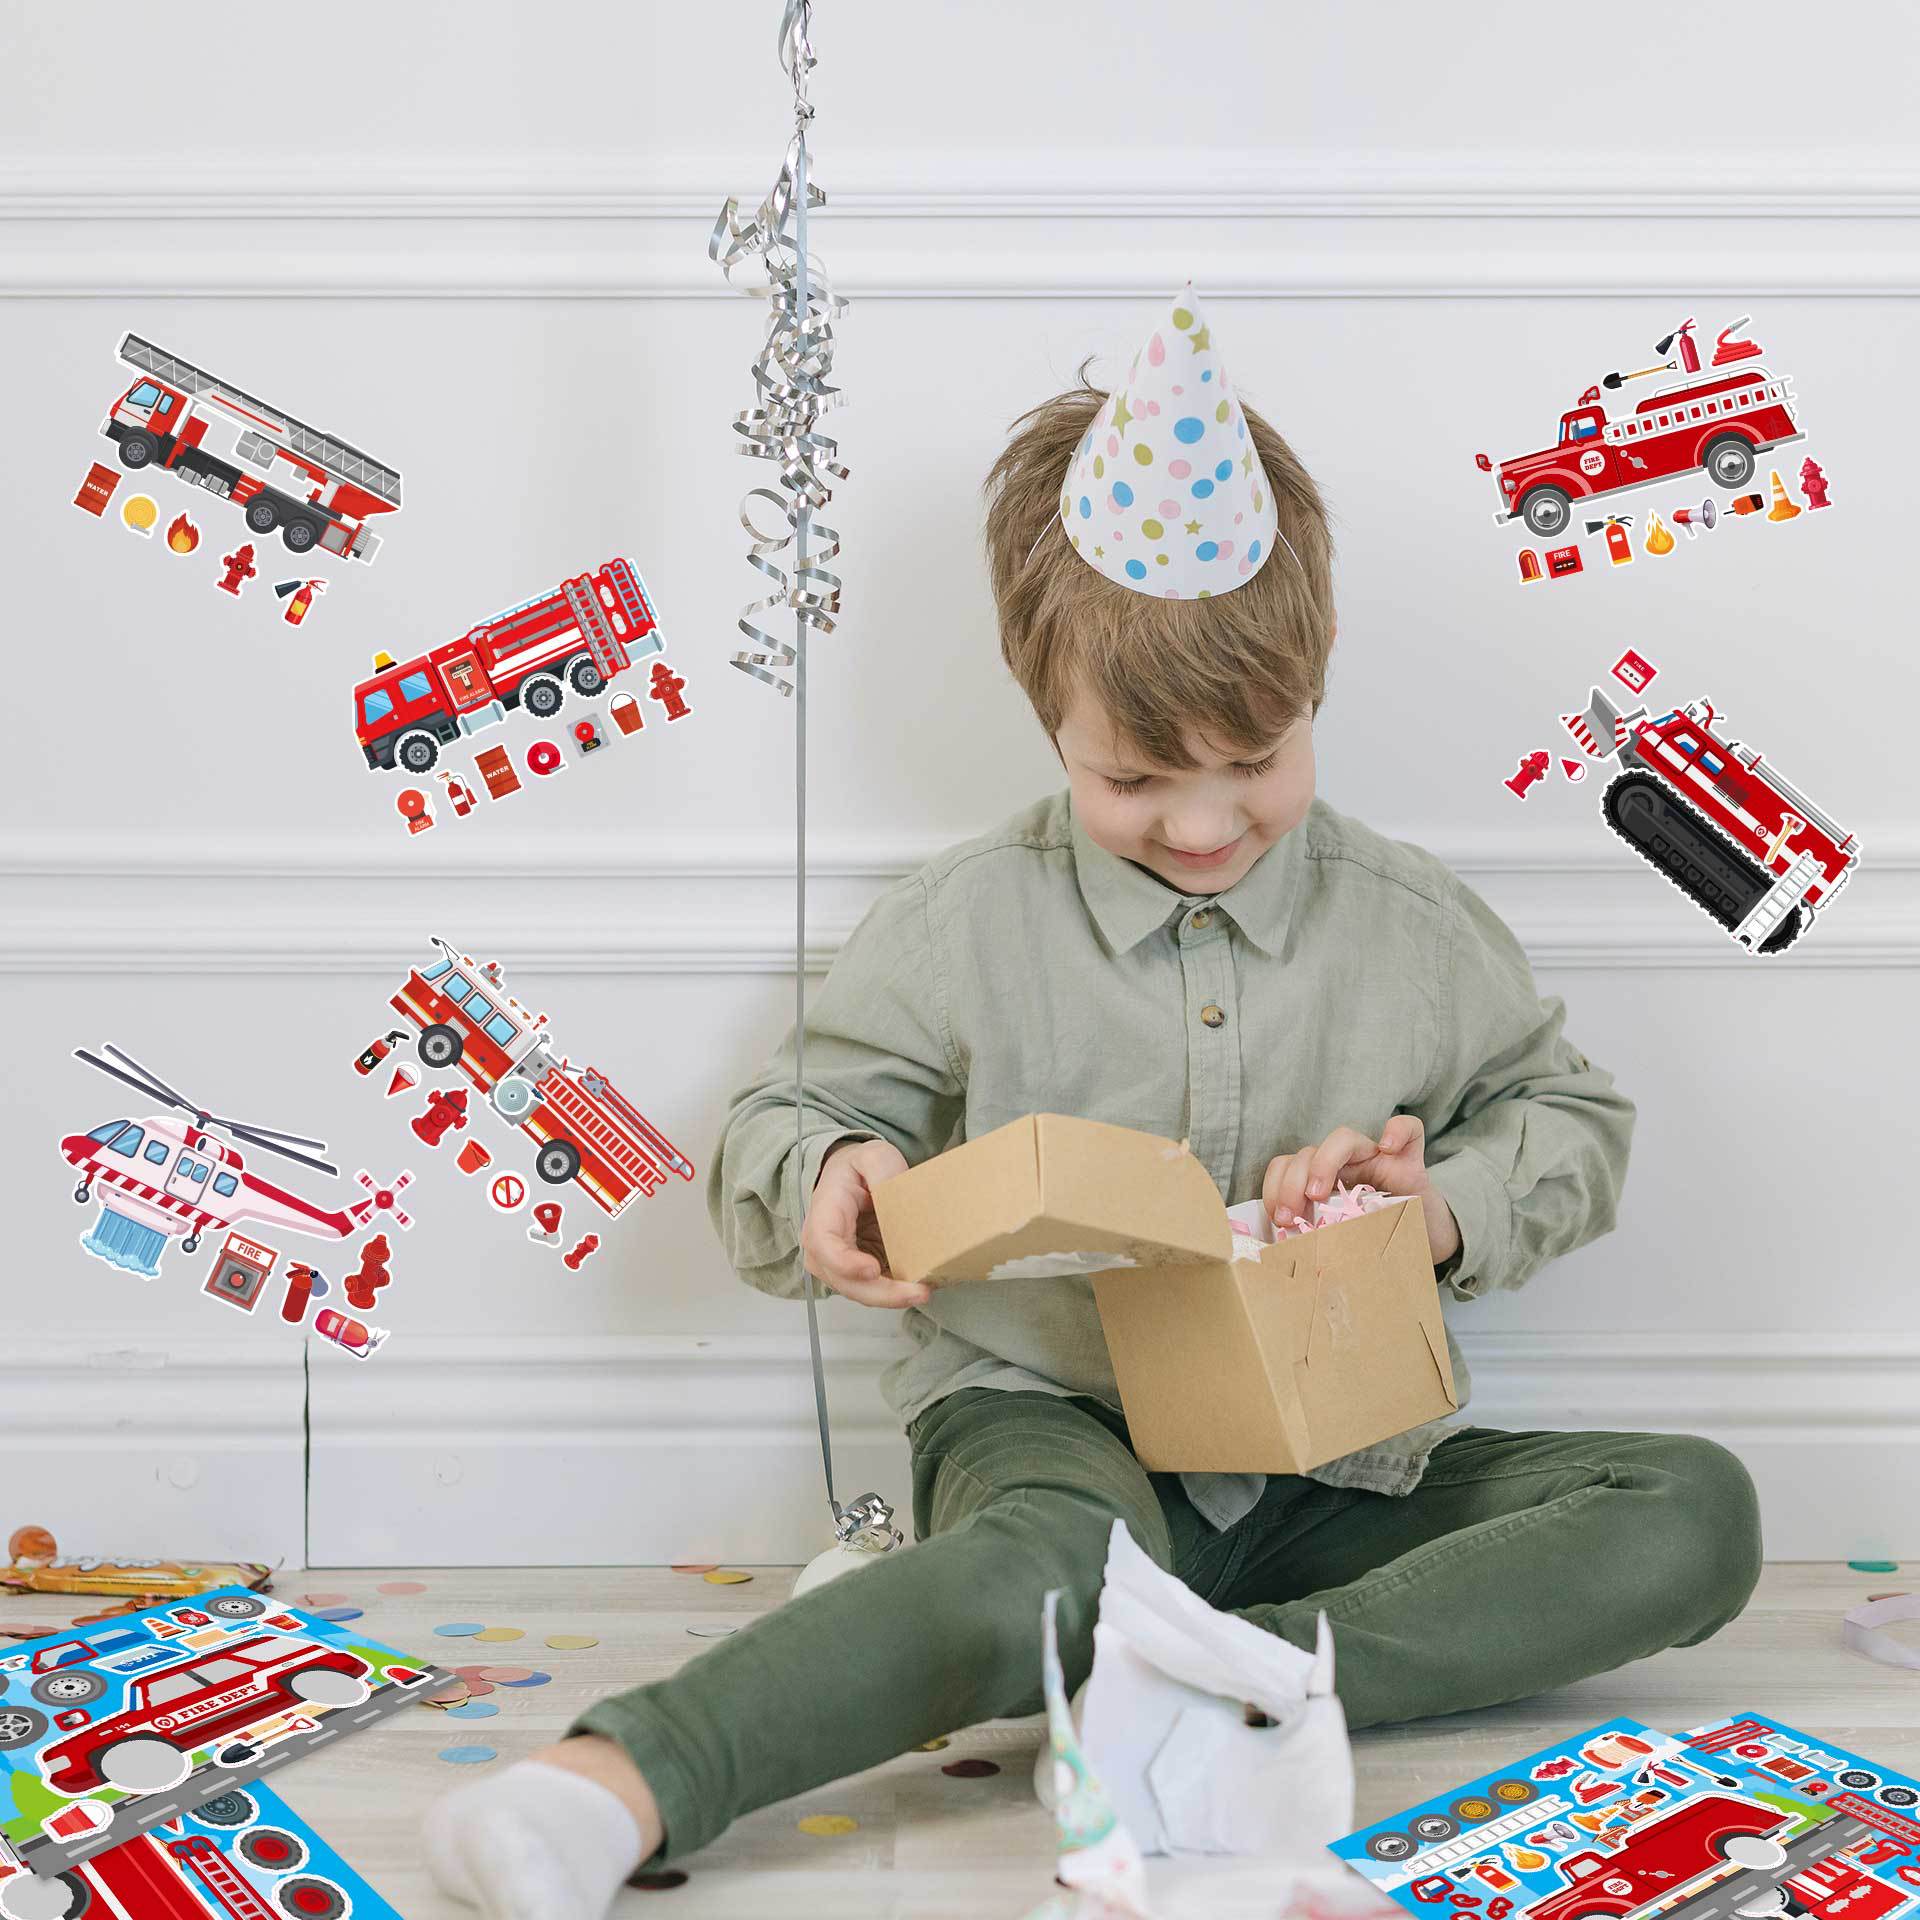 32 Sheets Fire Engine Make Your Own Stickers for Kids - TTpen